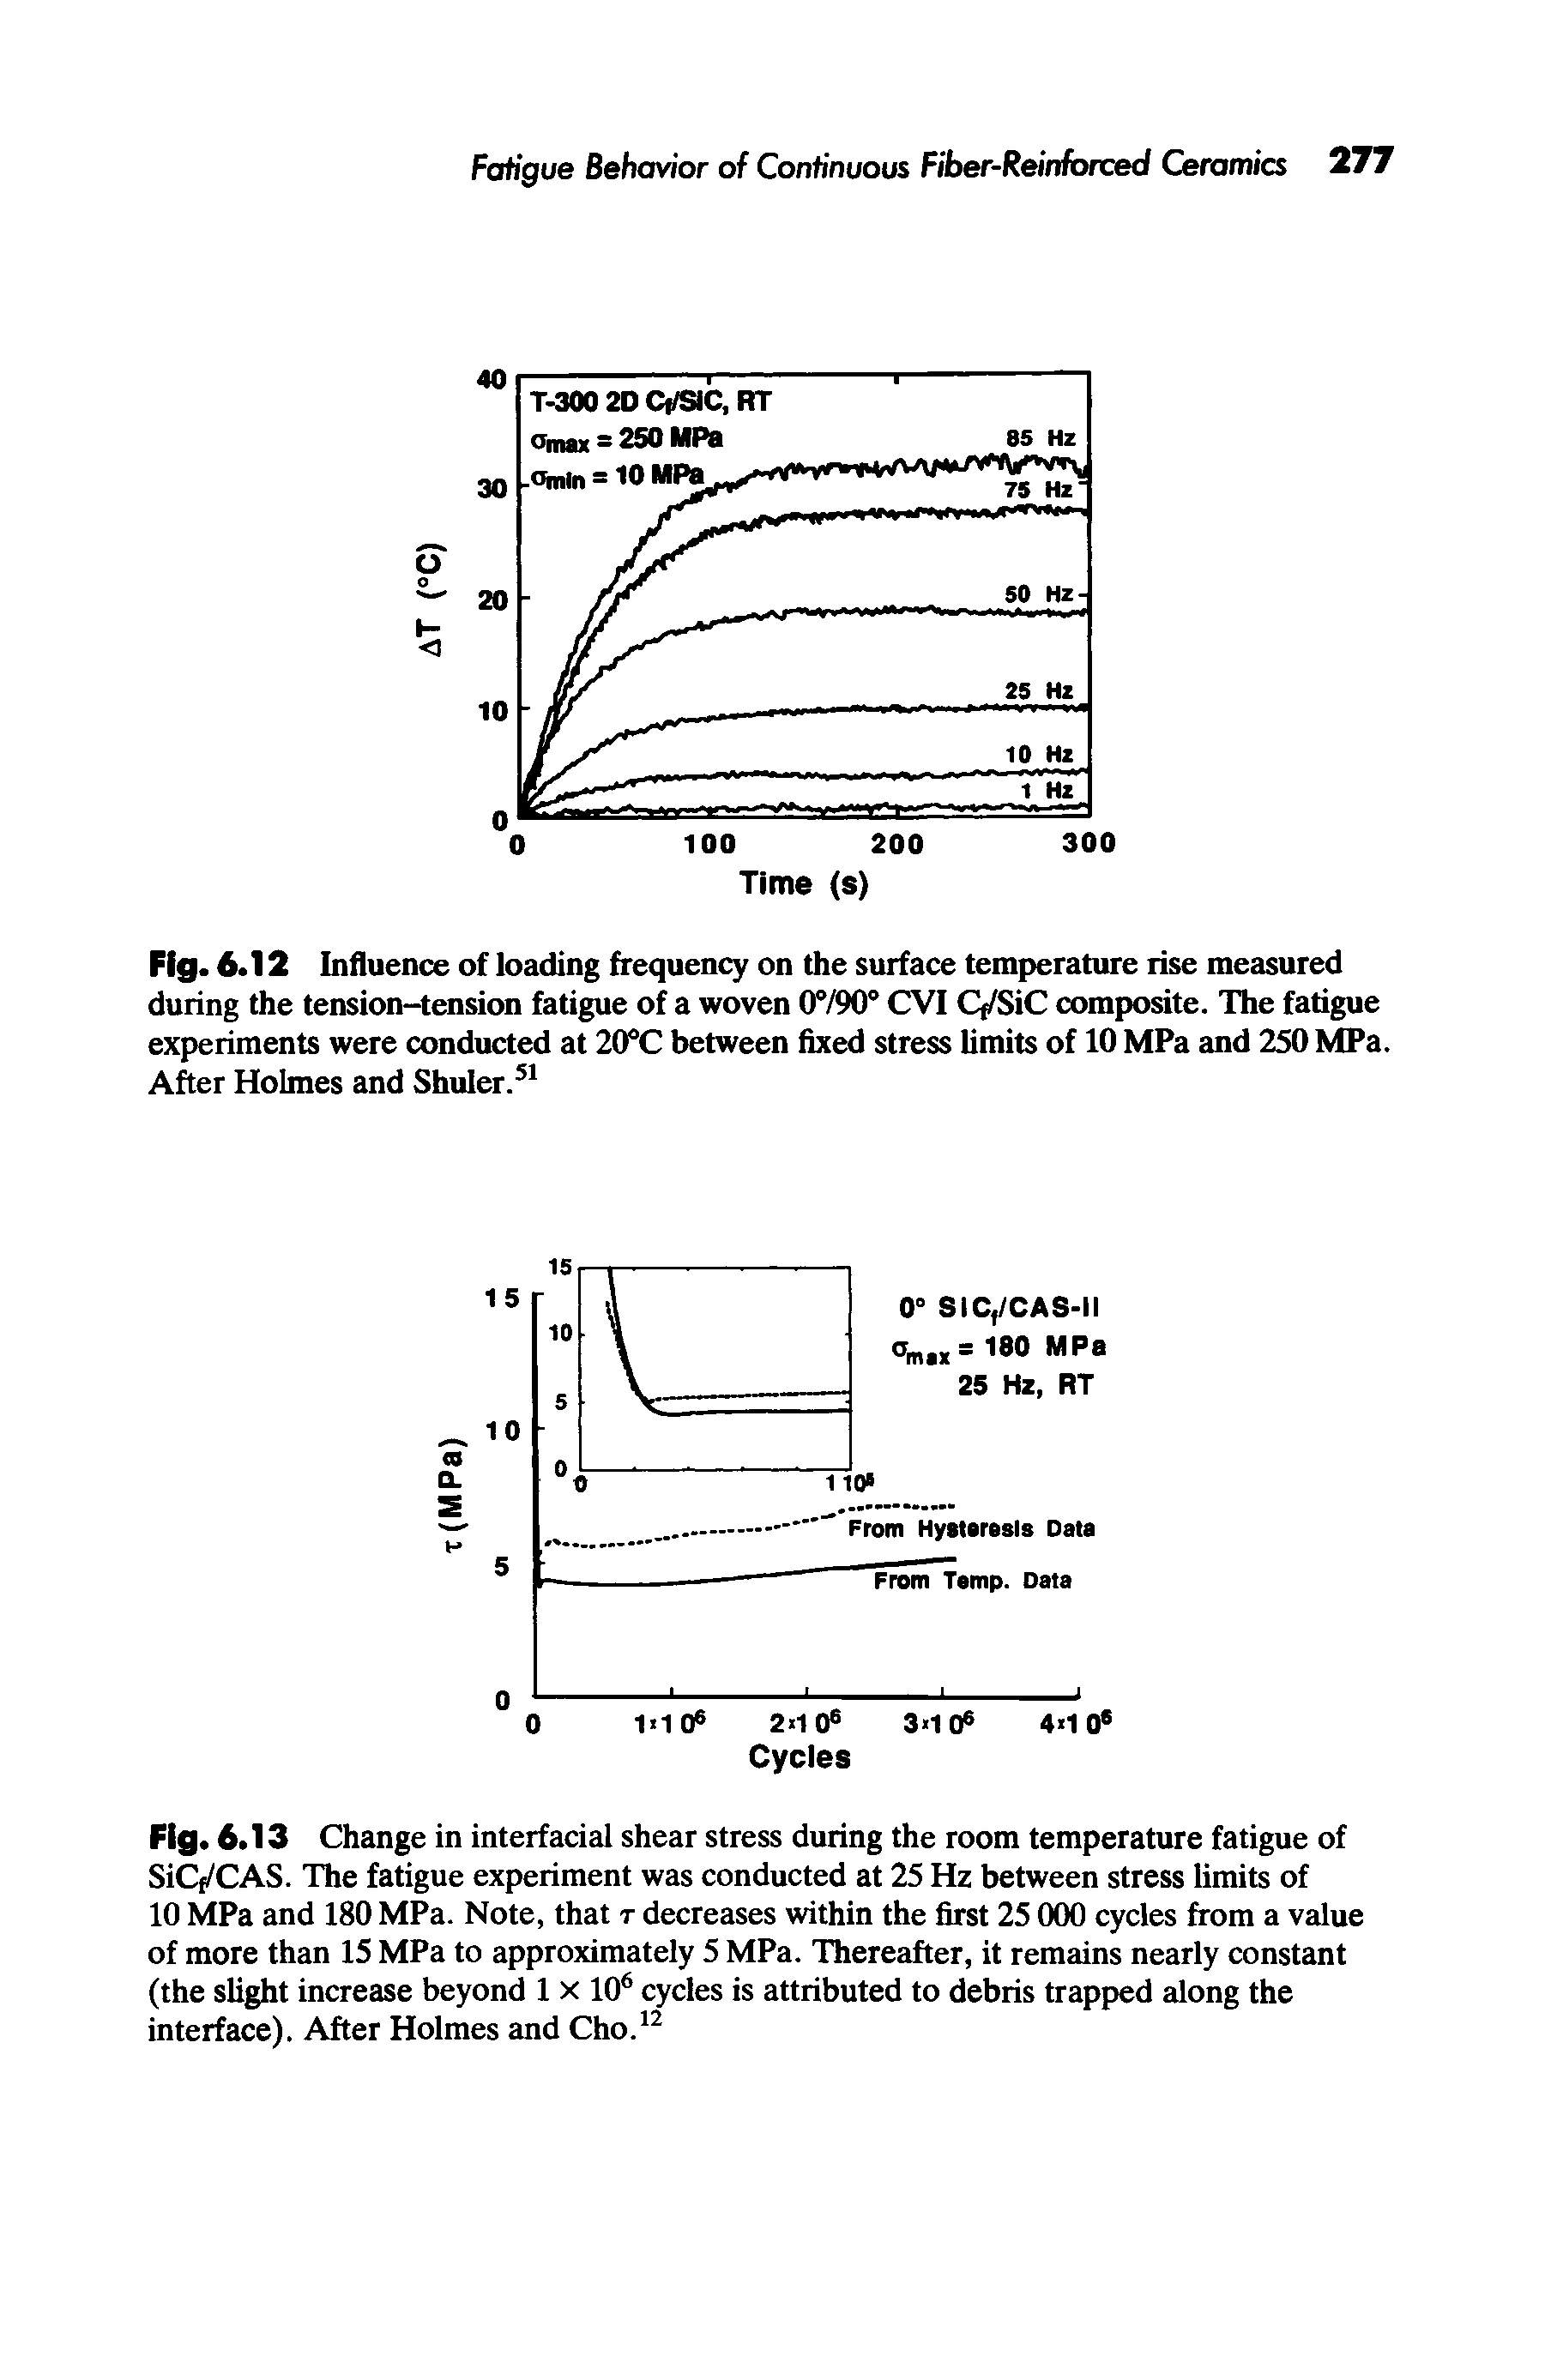 Fig. 6. 13 Change in interfacial shear stress during the room temperature fatigue of SiCf/CAS. The fatigue experiment was conducted at 25 Hz between stress limits of 10 MPa and 180 MPa. Note, that r decreases within the first 25 000 cycles from a value of more than 15 MPa to approximately 5 MPa. Thereafter, it remains nearly constant (the slight increase beyond 1 x 106 cycles is attributed to debris trapped along the interface). After Holmes and Cho.12...